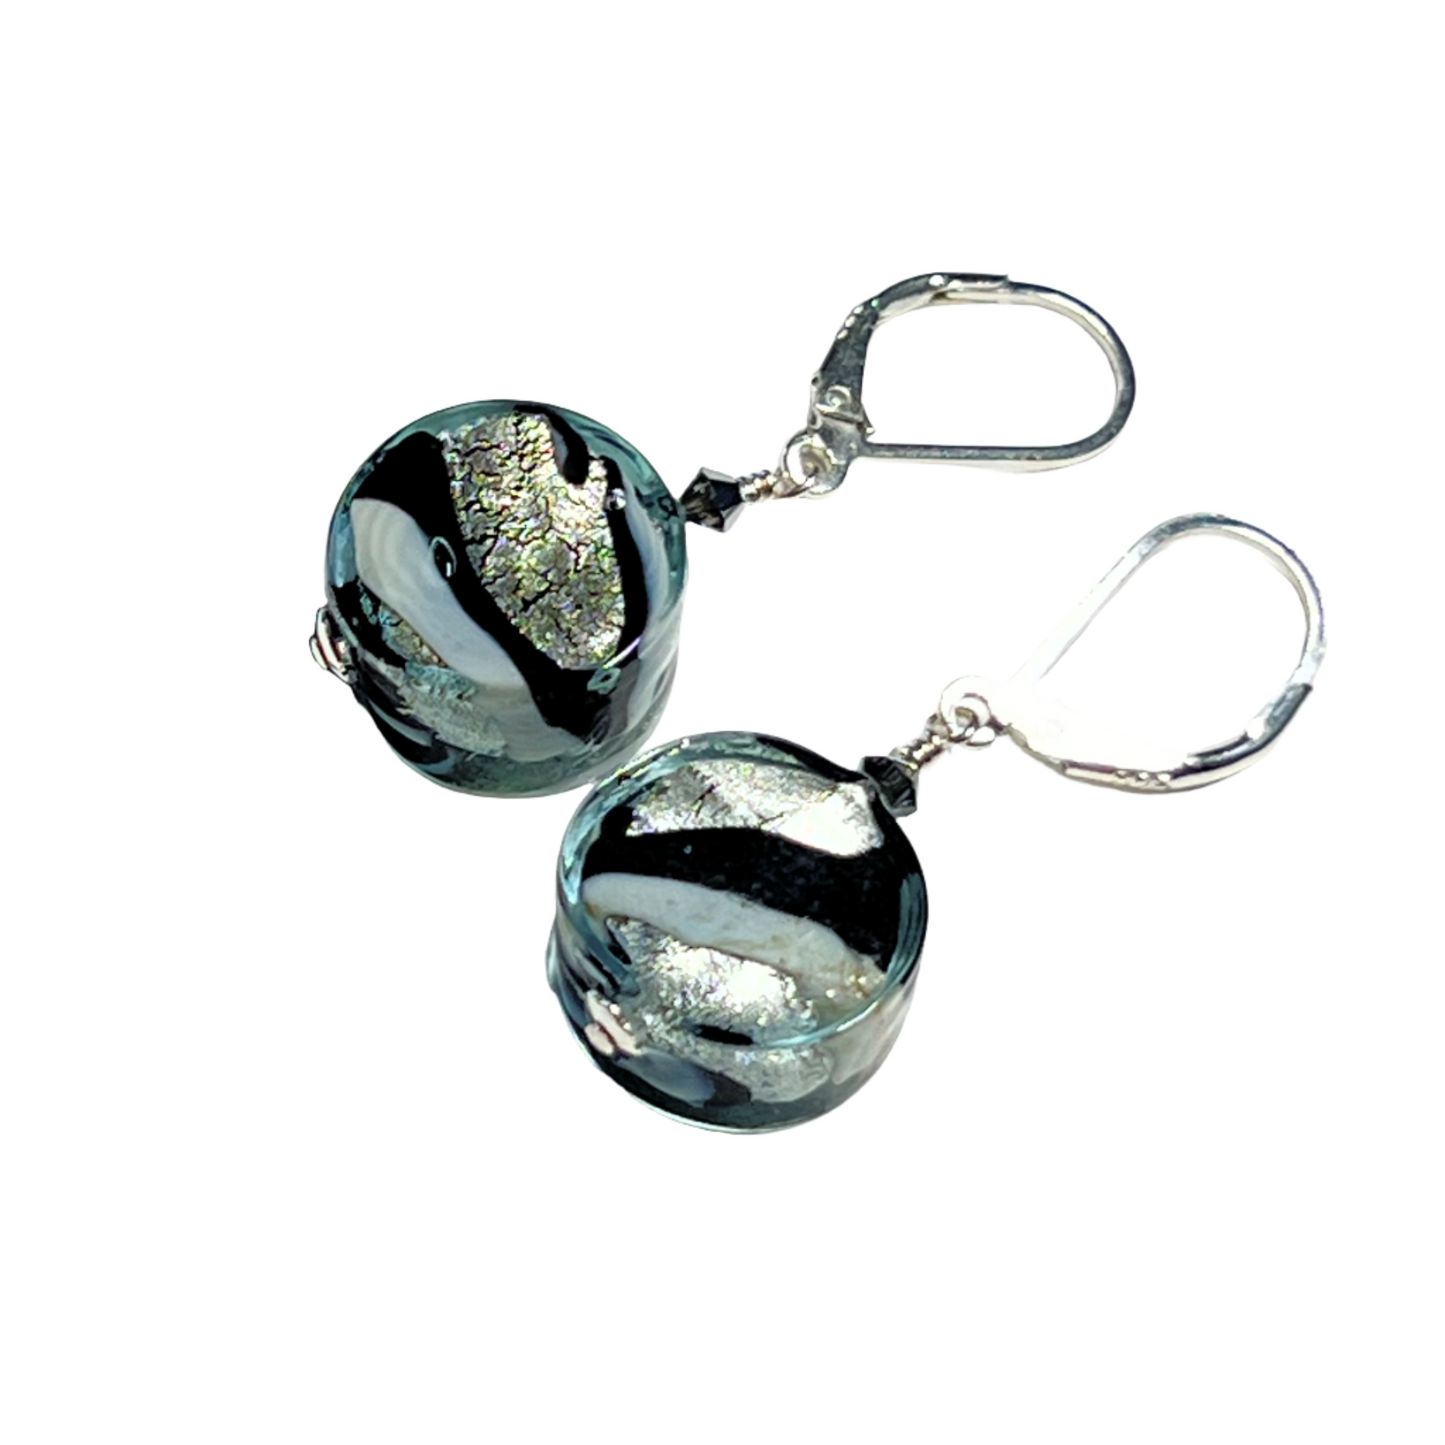 Murano Glass Black White Coin Earrings - Sterling Silver | Unique Gift for Her